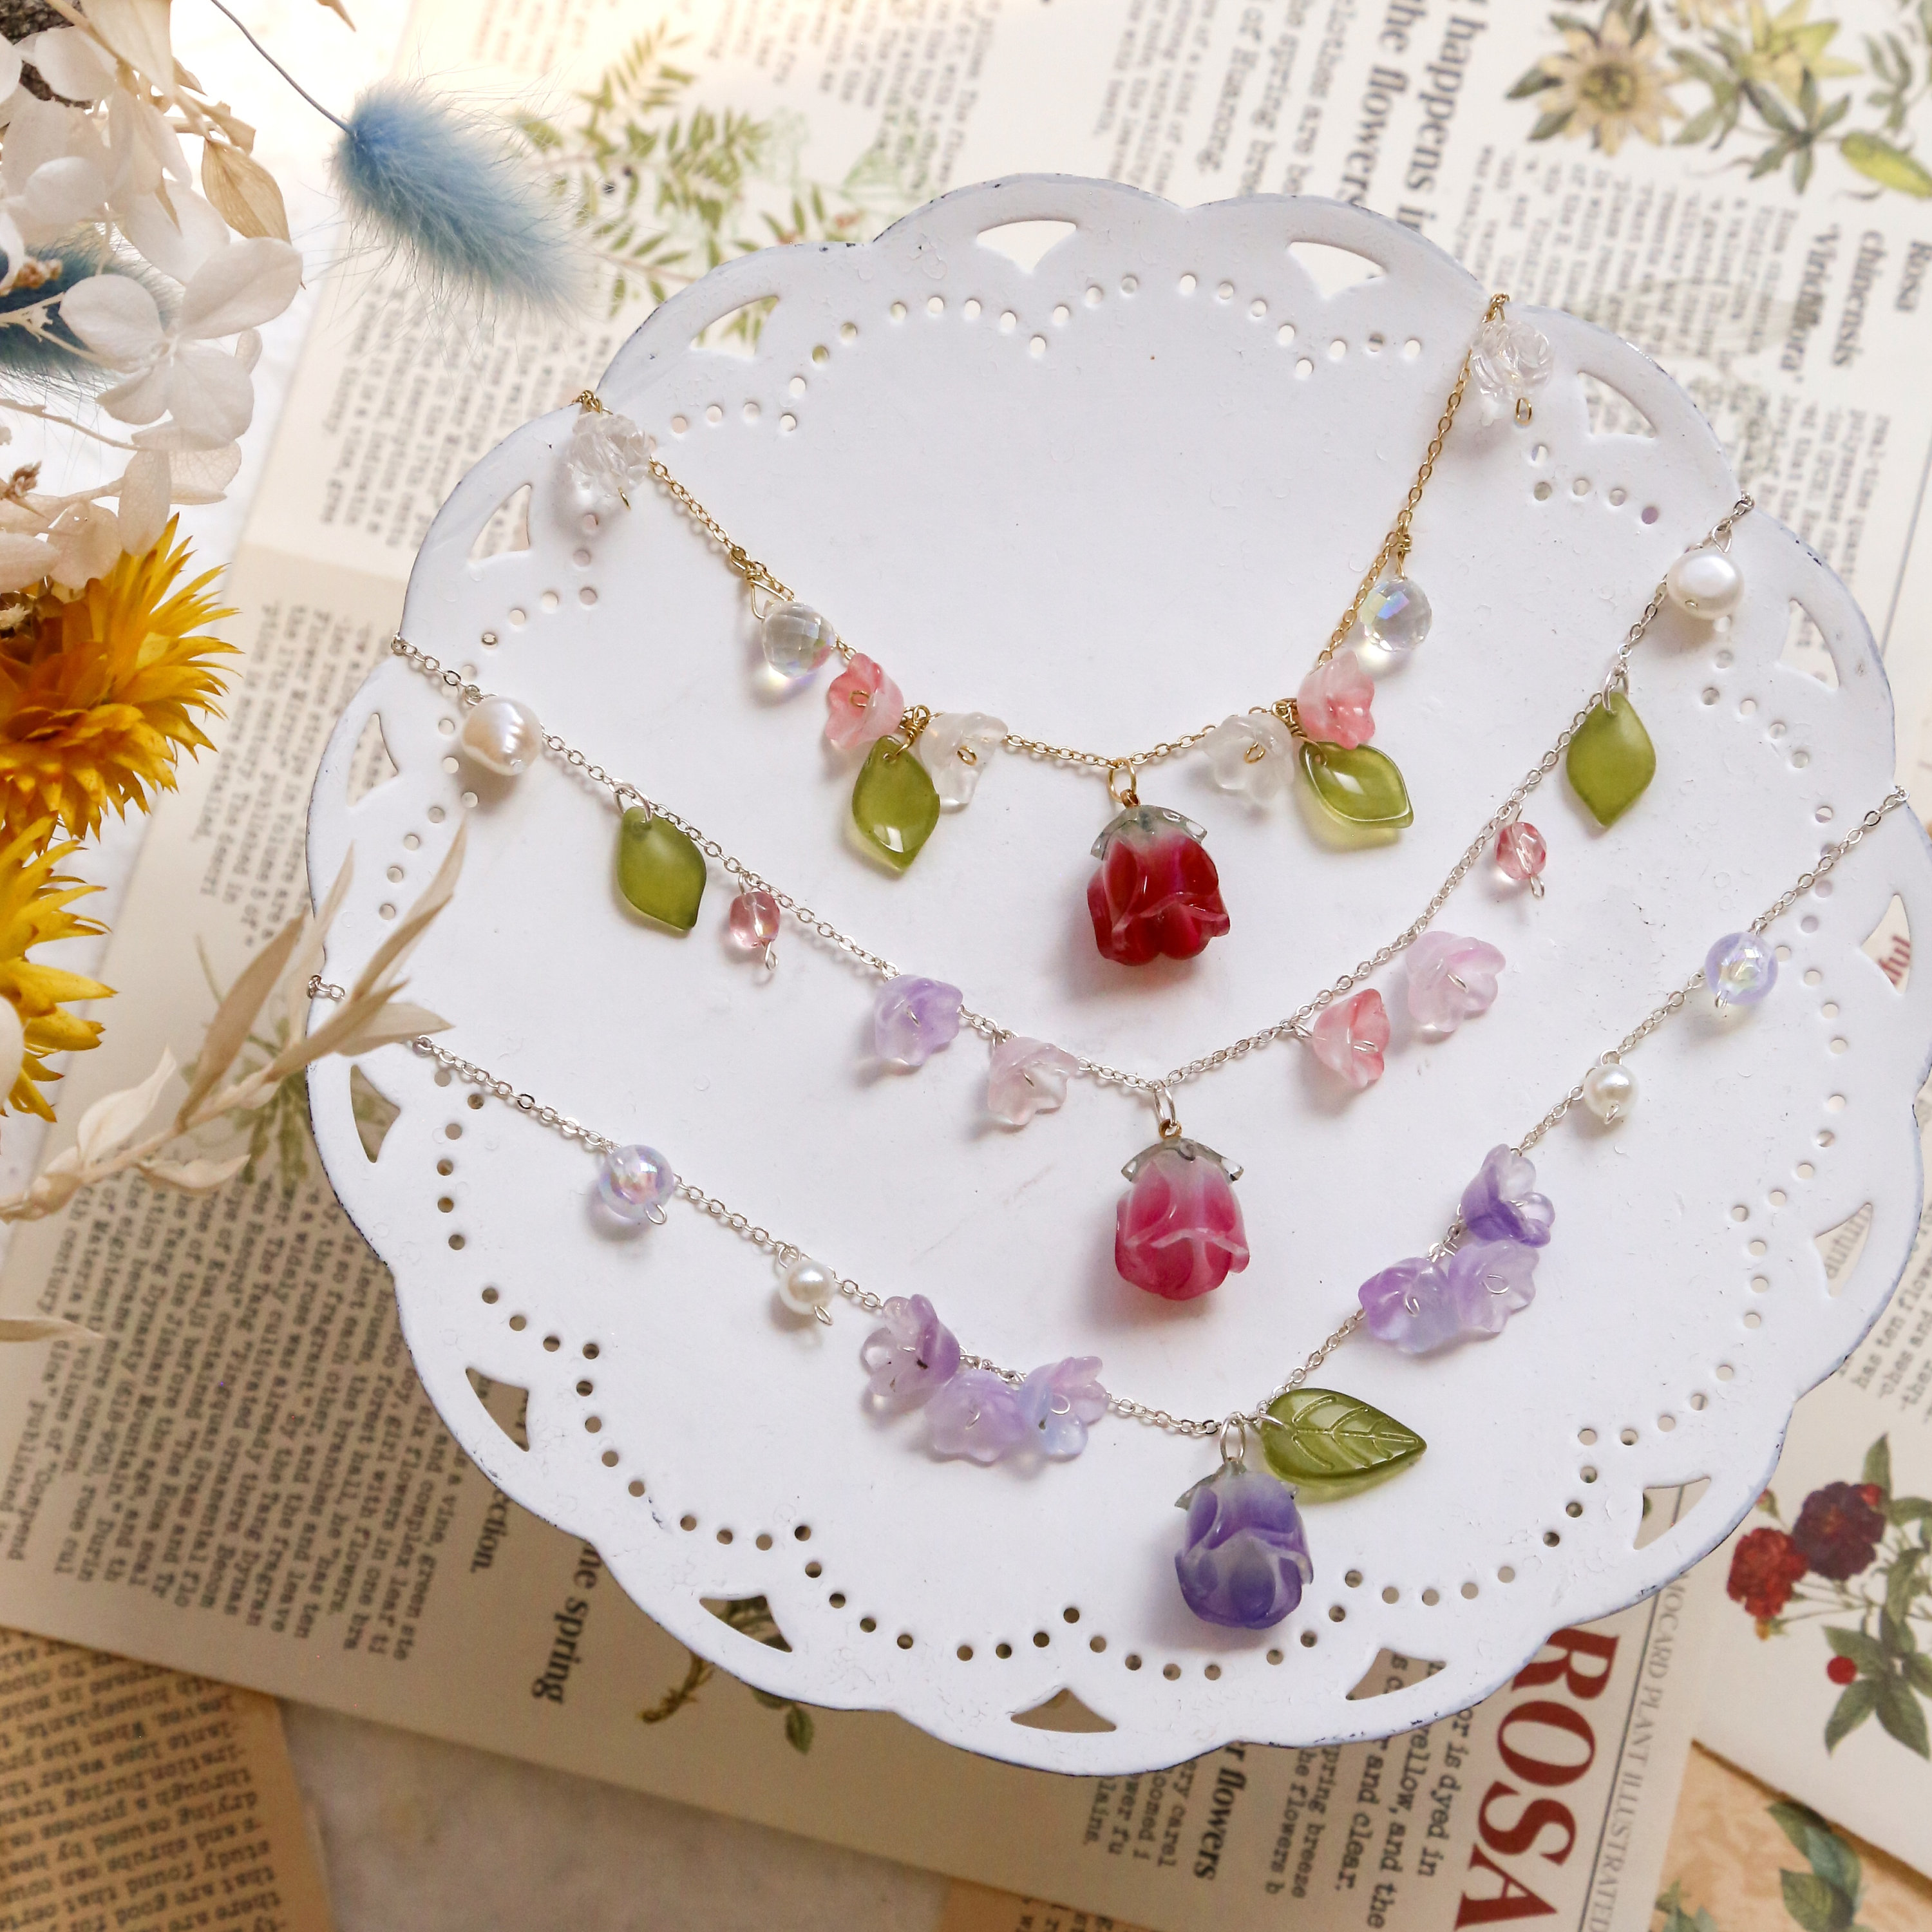 Shrinky Dinks Love Notes Jewelry Kit only $9.68